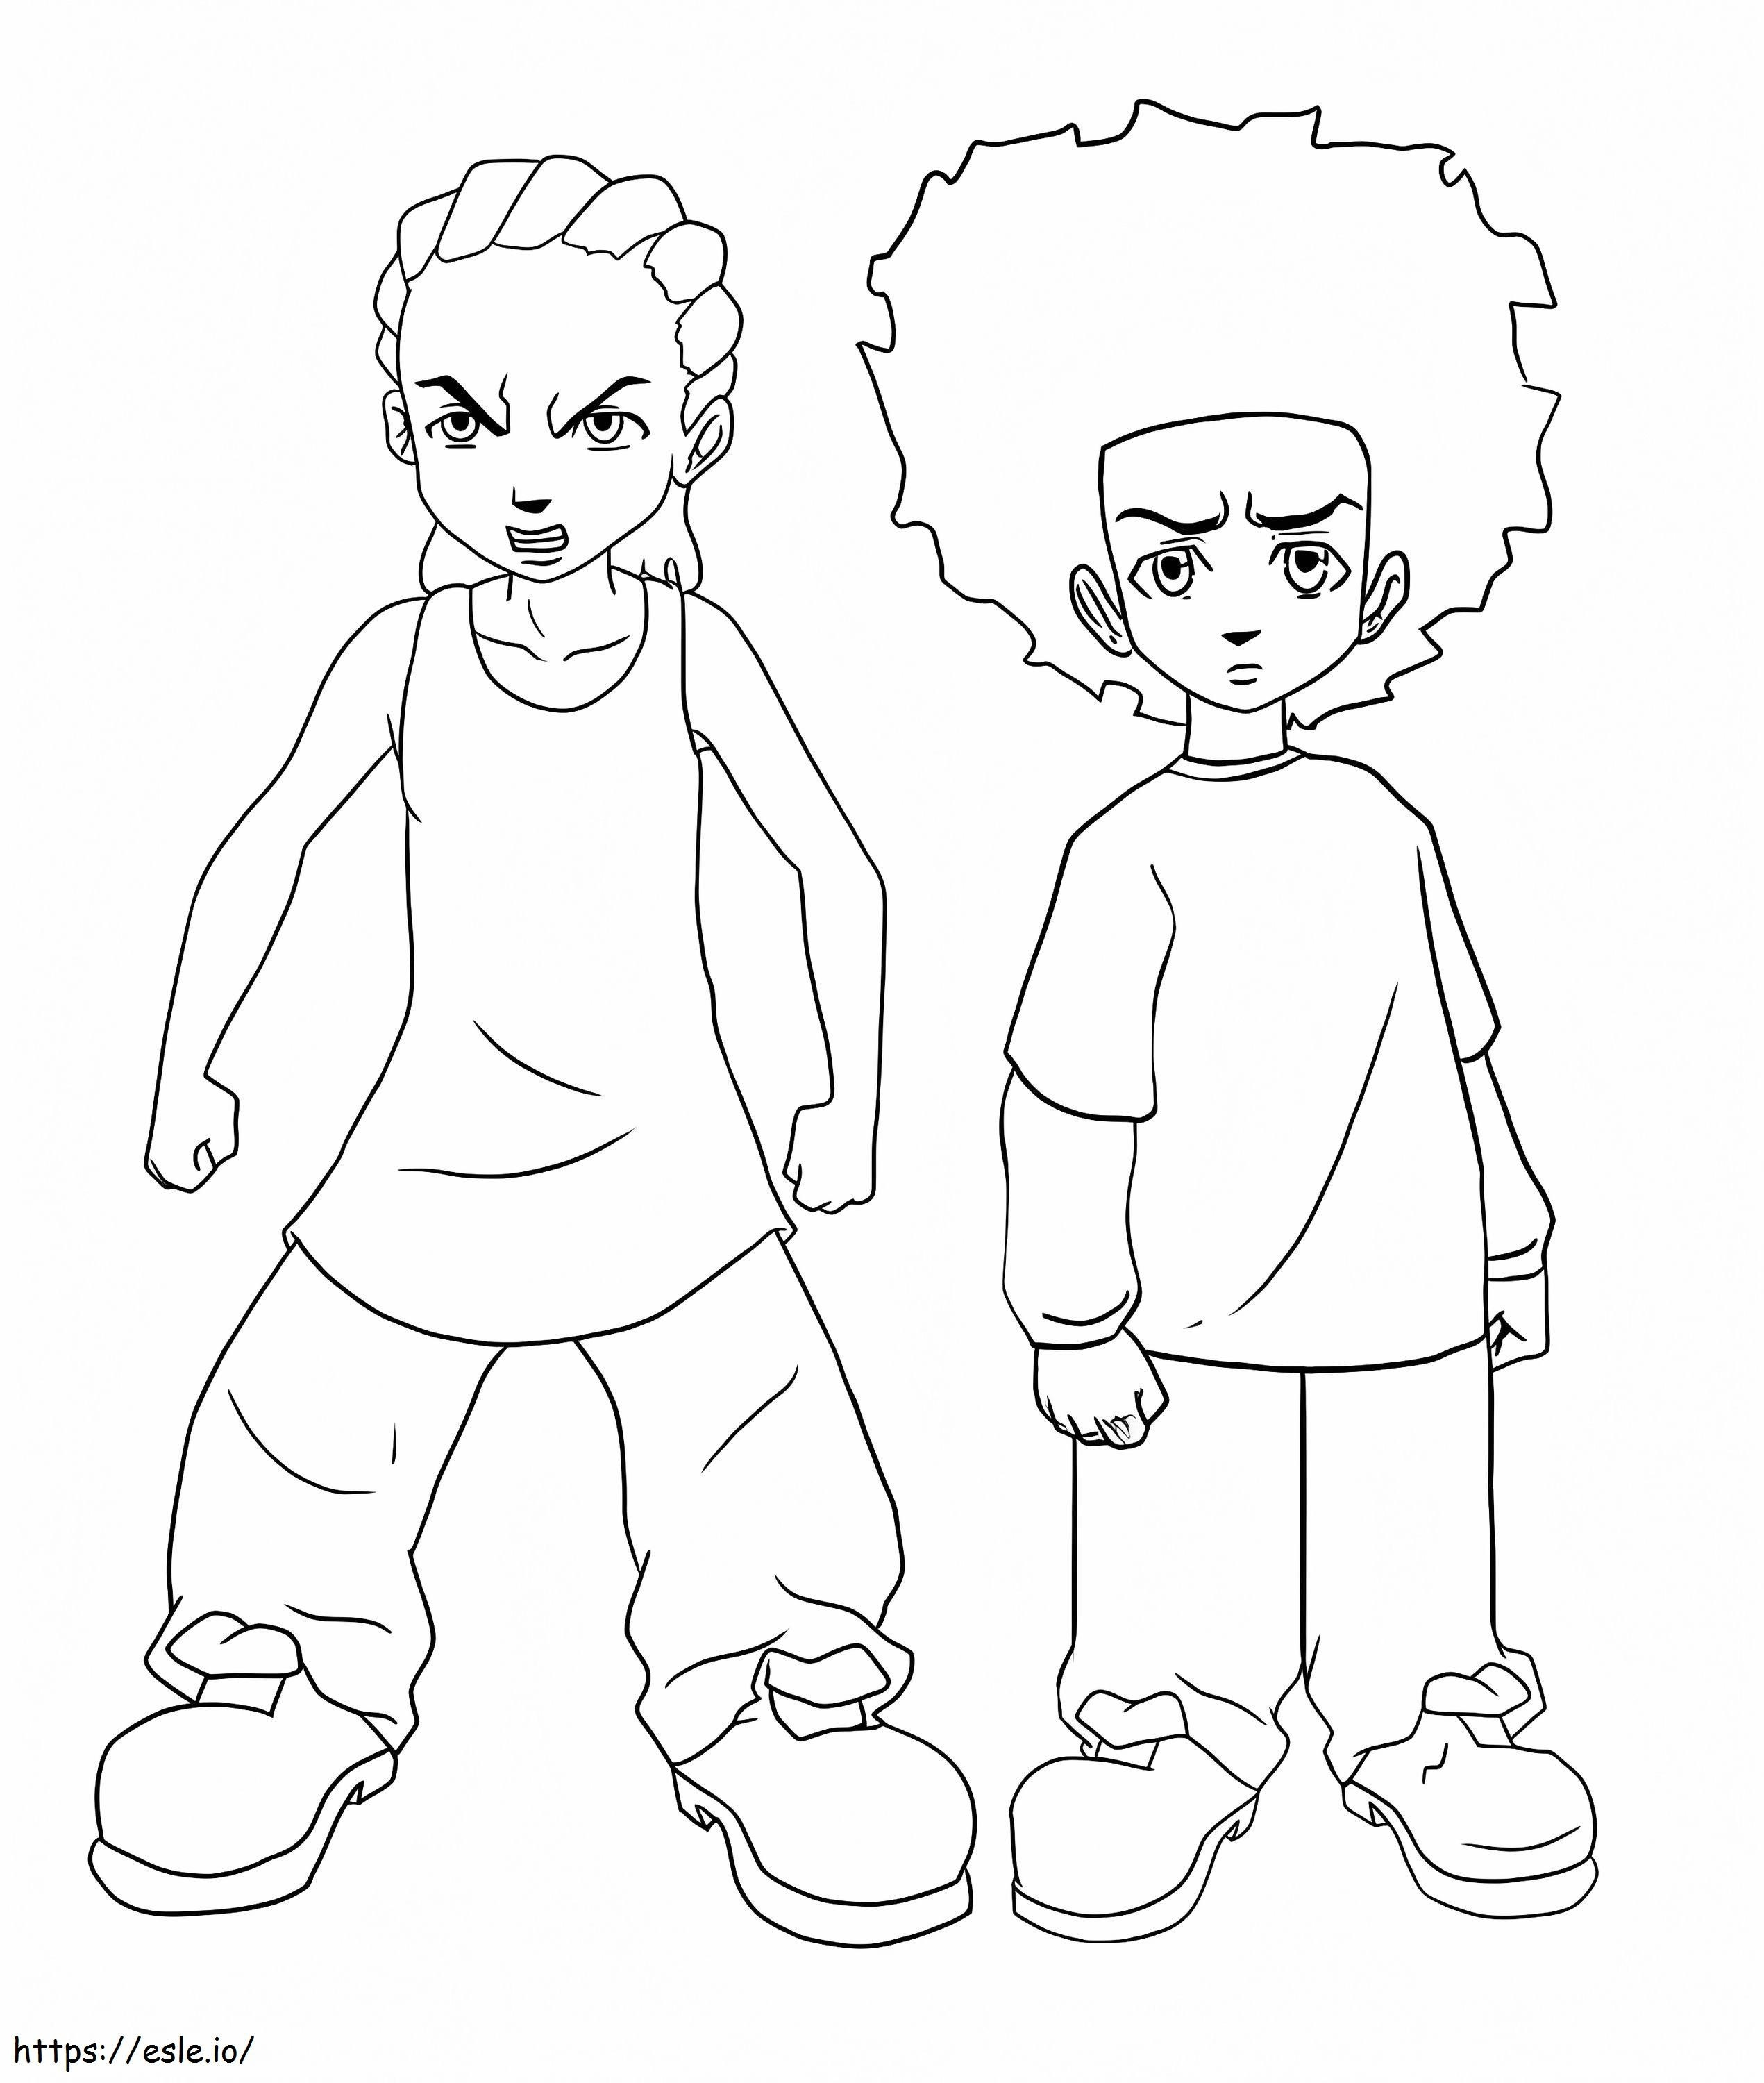 Huey And Riley Freeman From Boondocks 1 coloring page